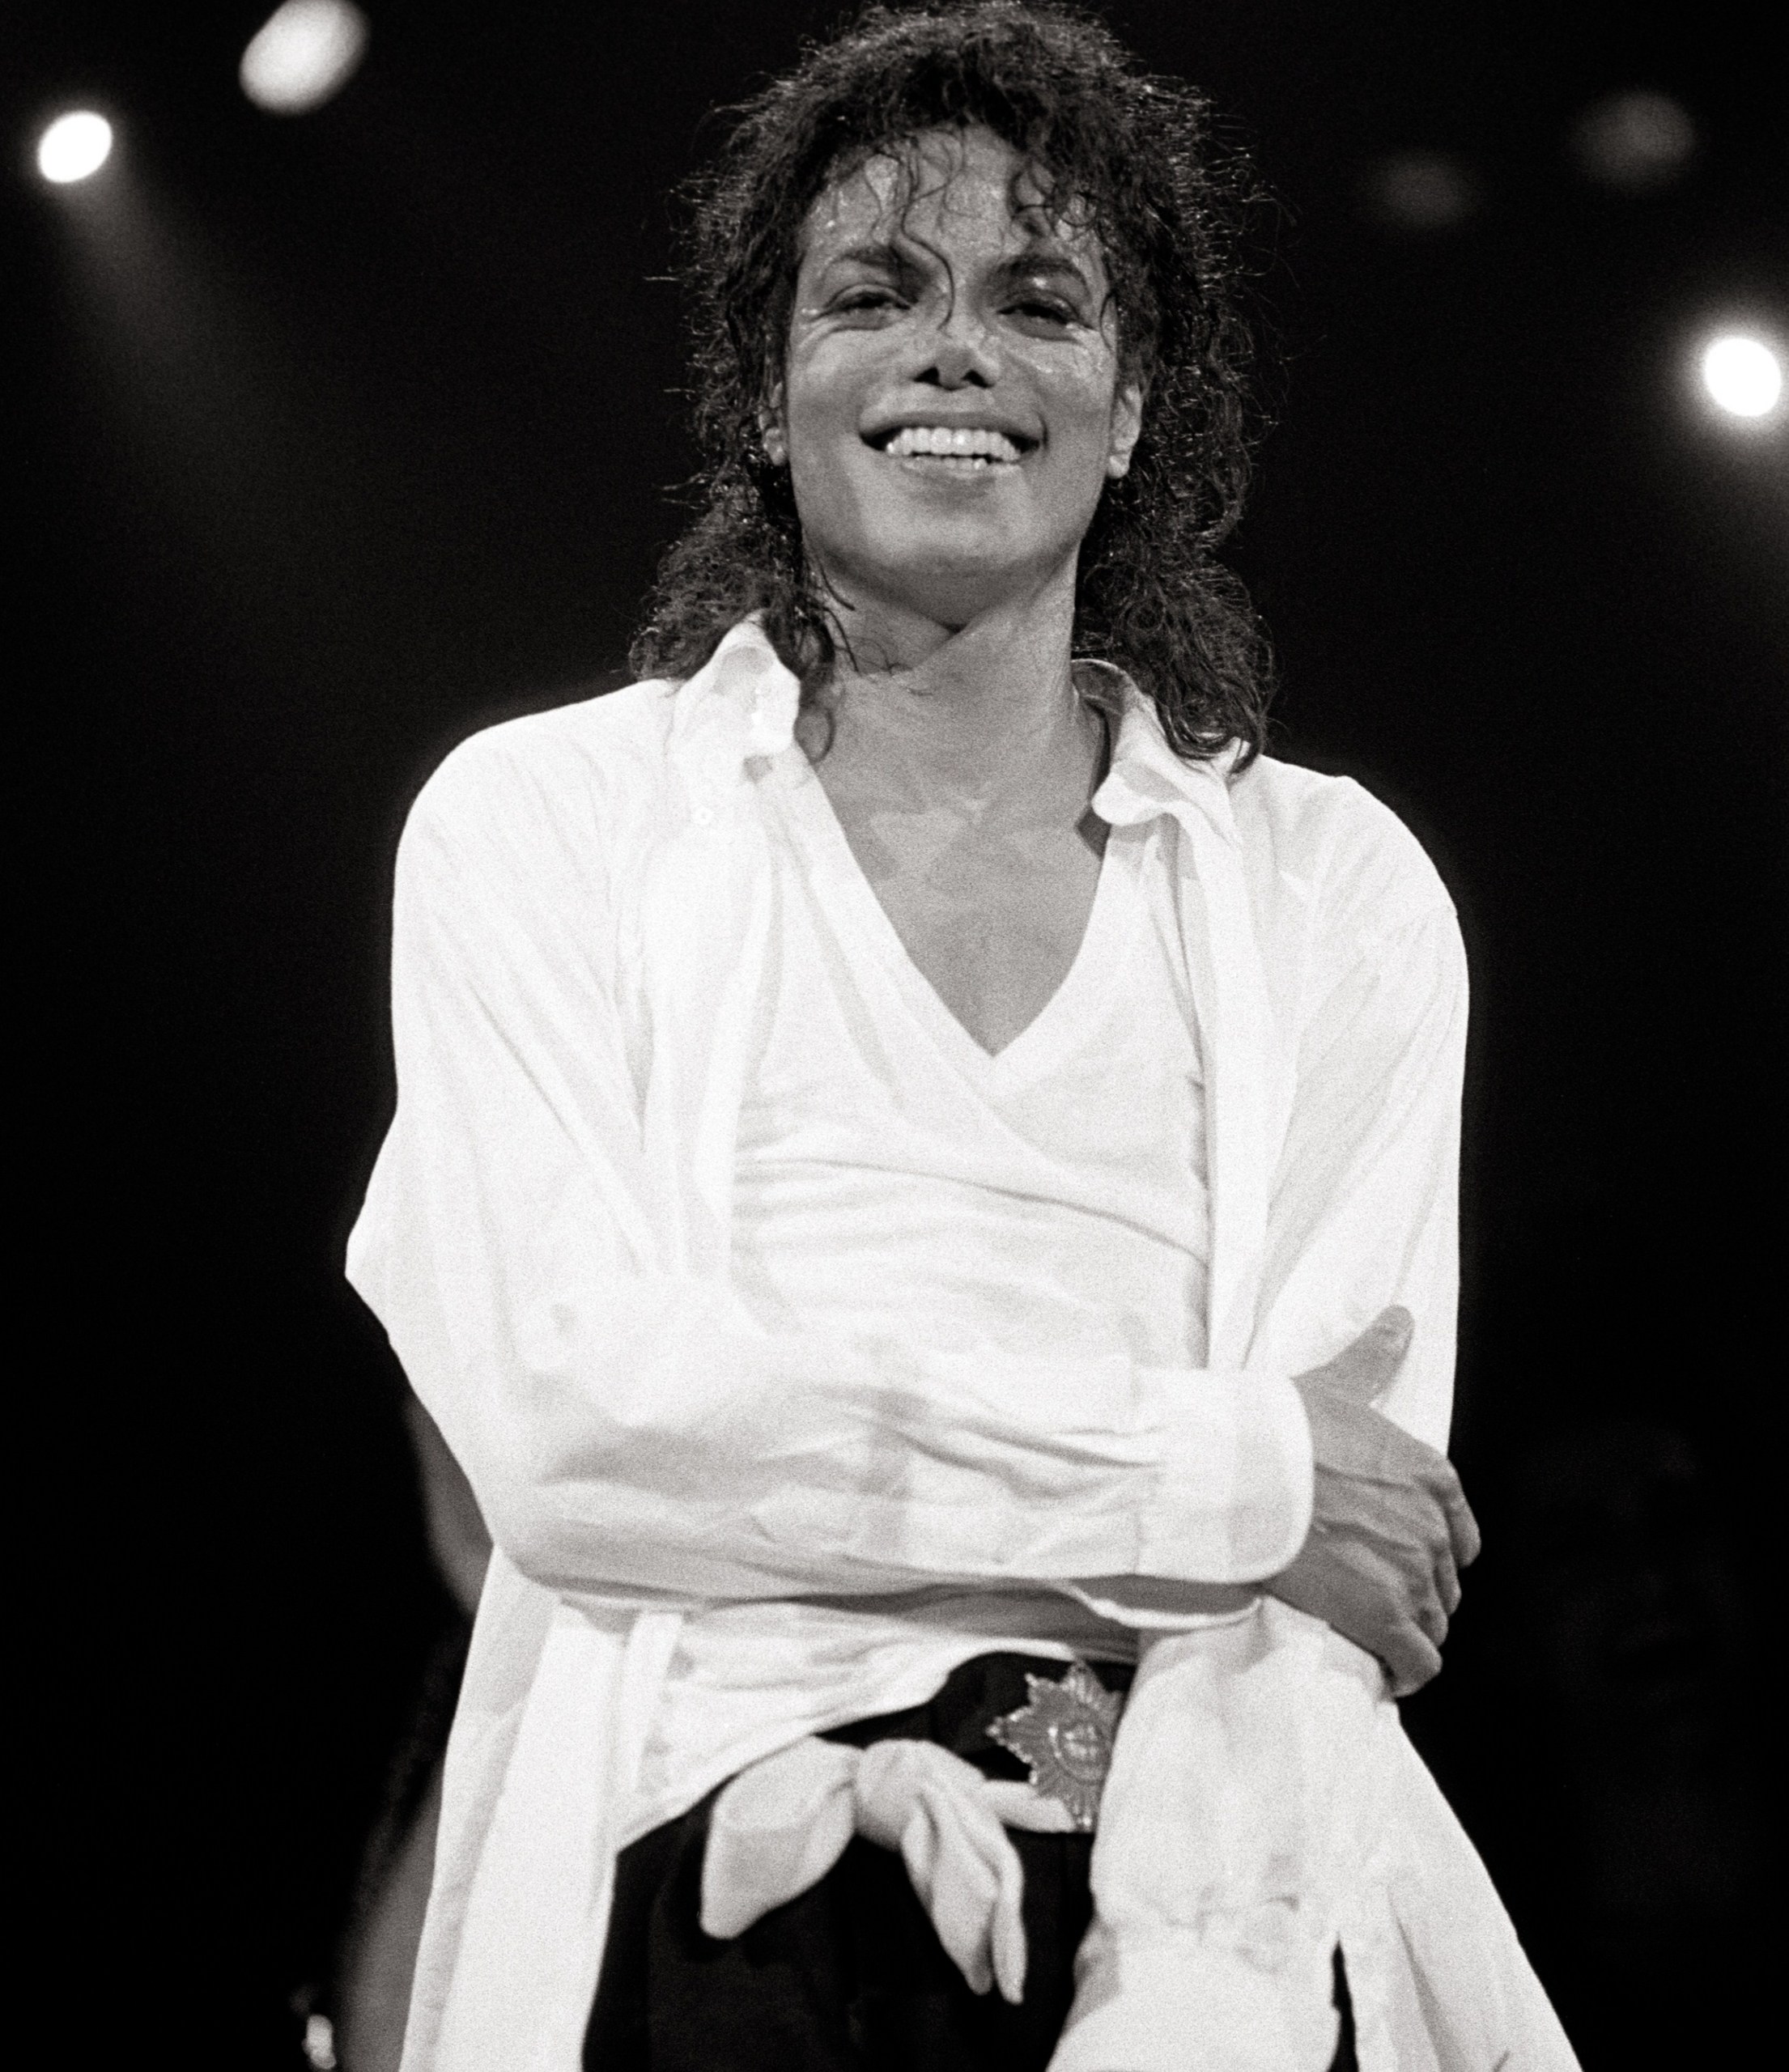 Michael Jackson smiling on stage, lightly holding arm during the Bad tour